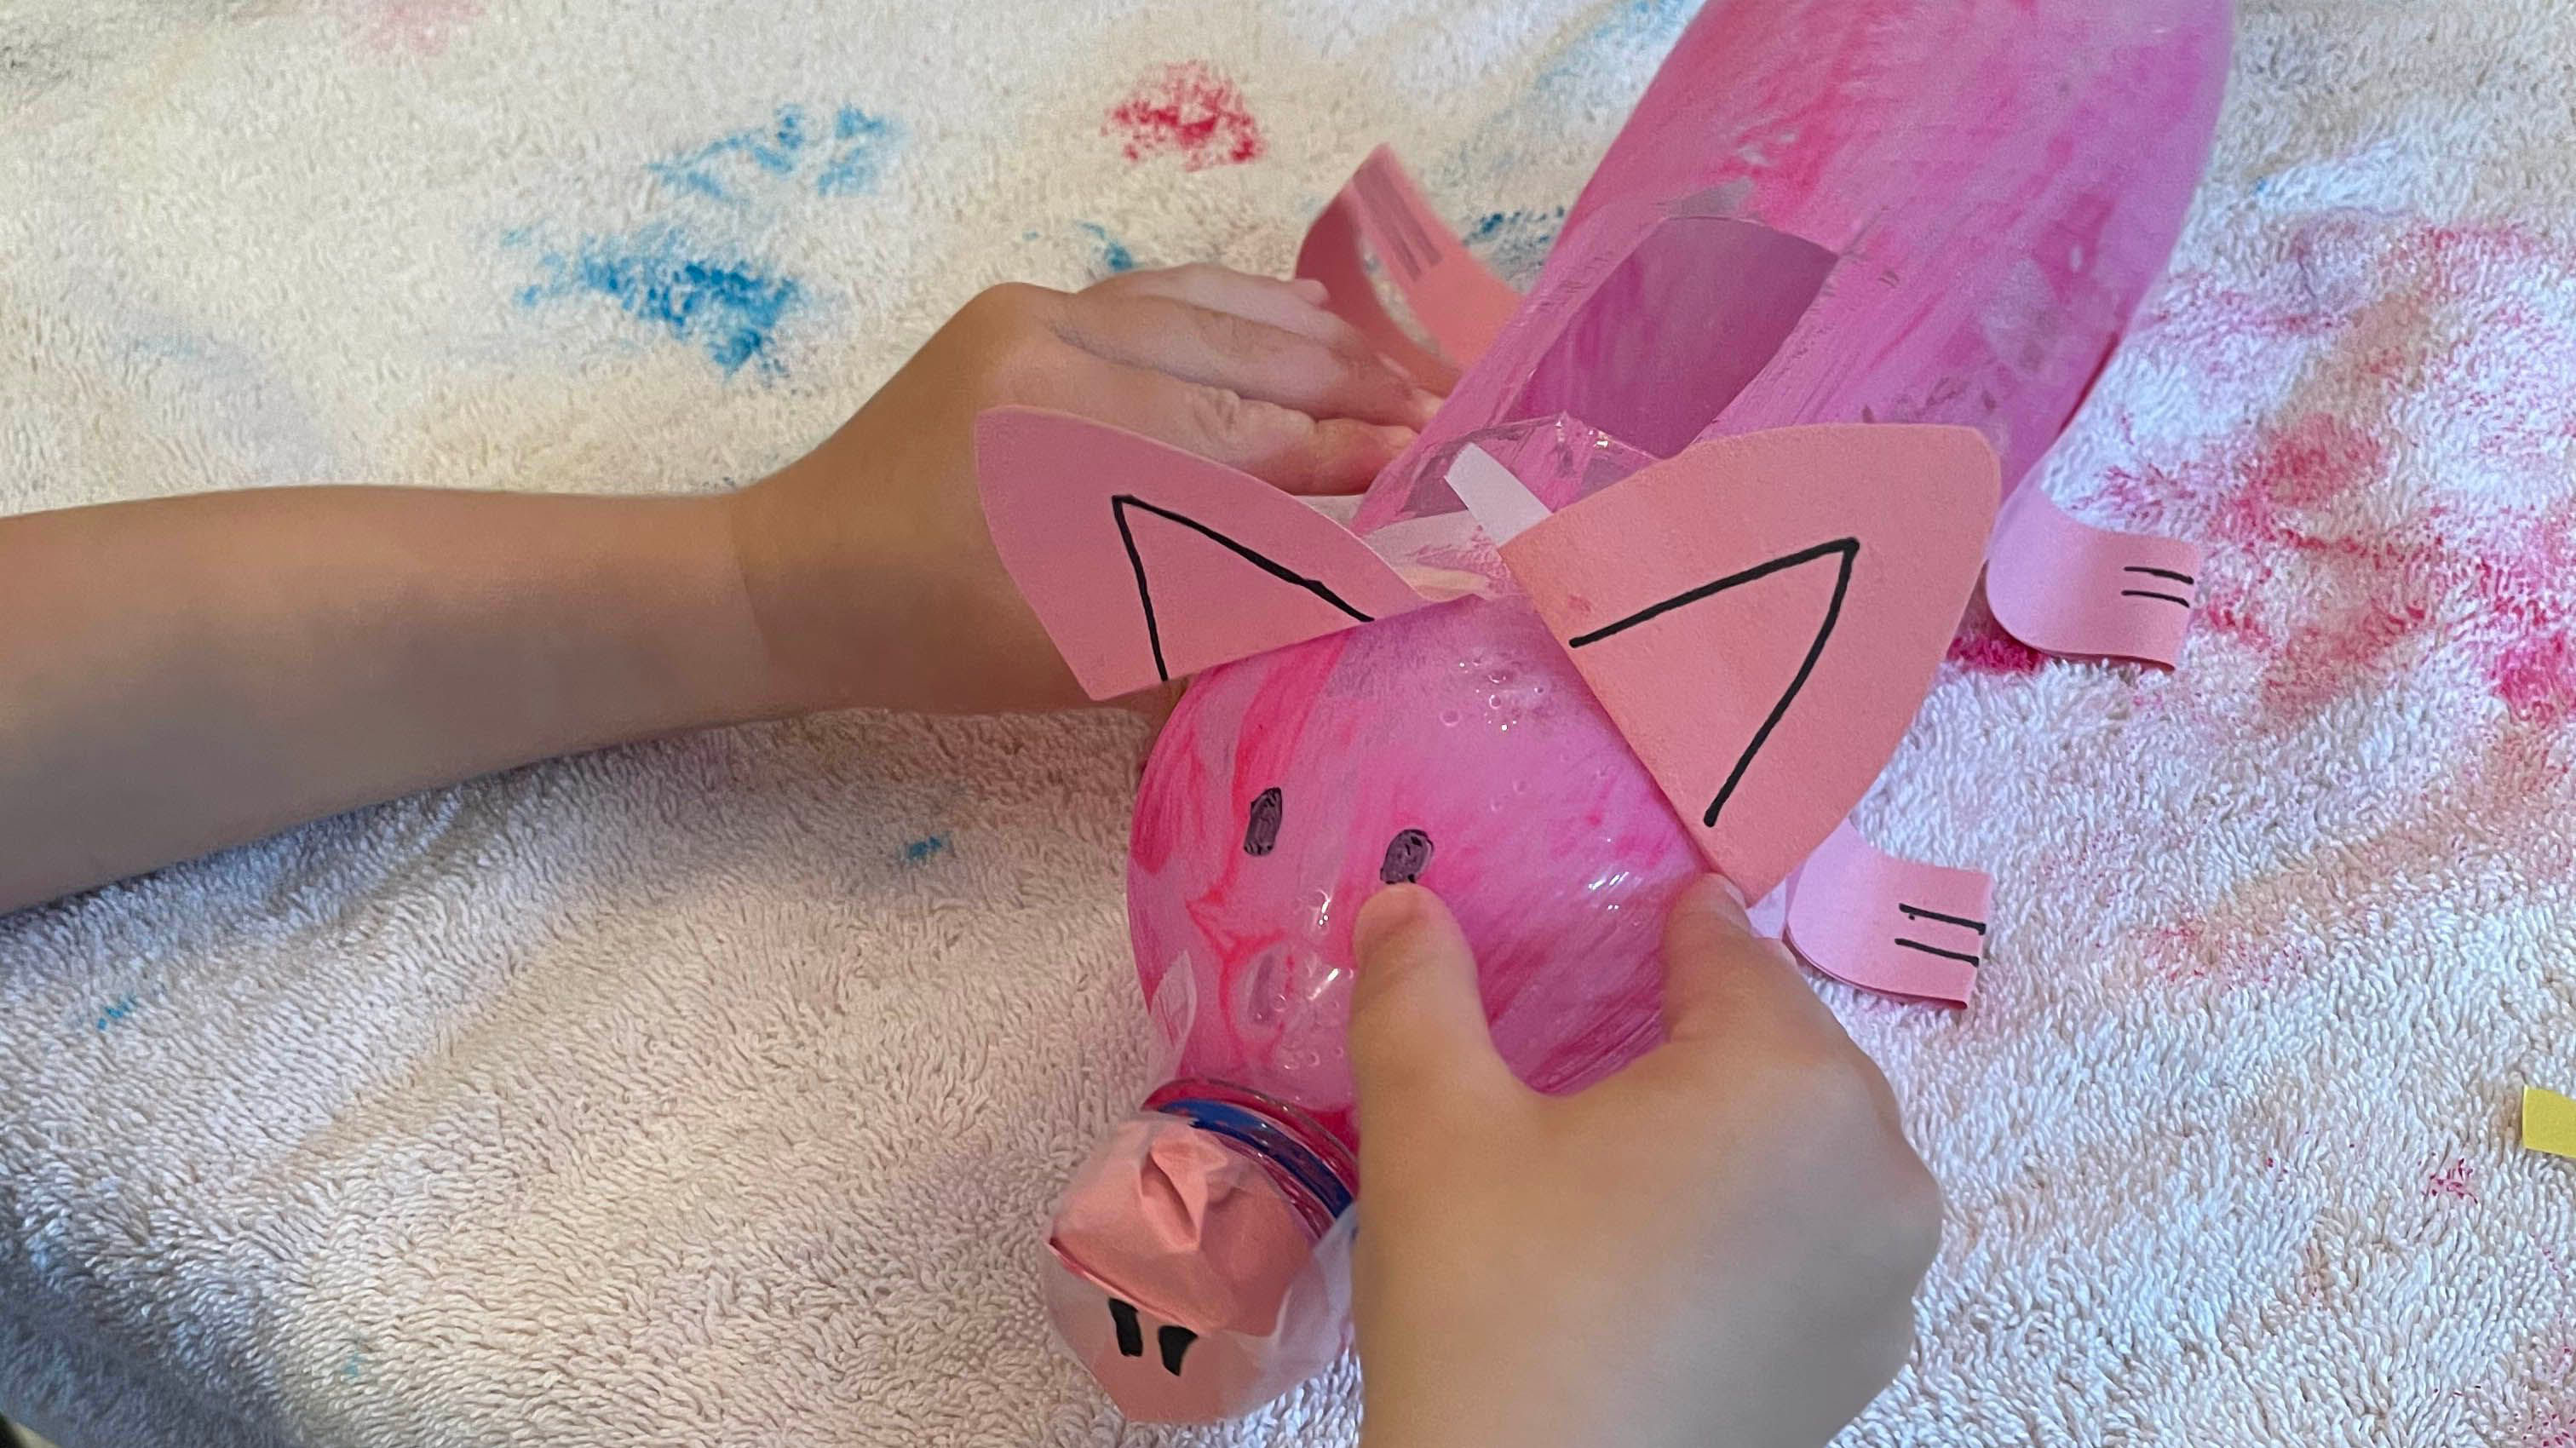 Child adding paper cut out ears to pink piggy bank